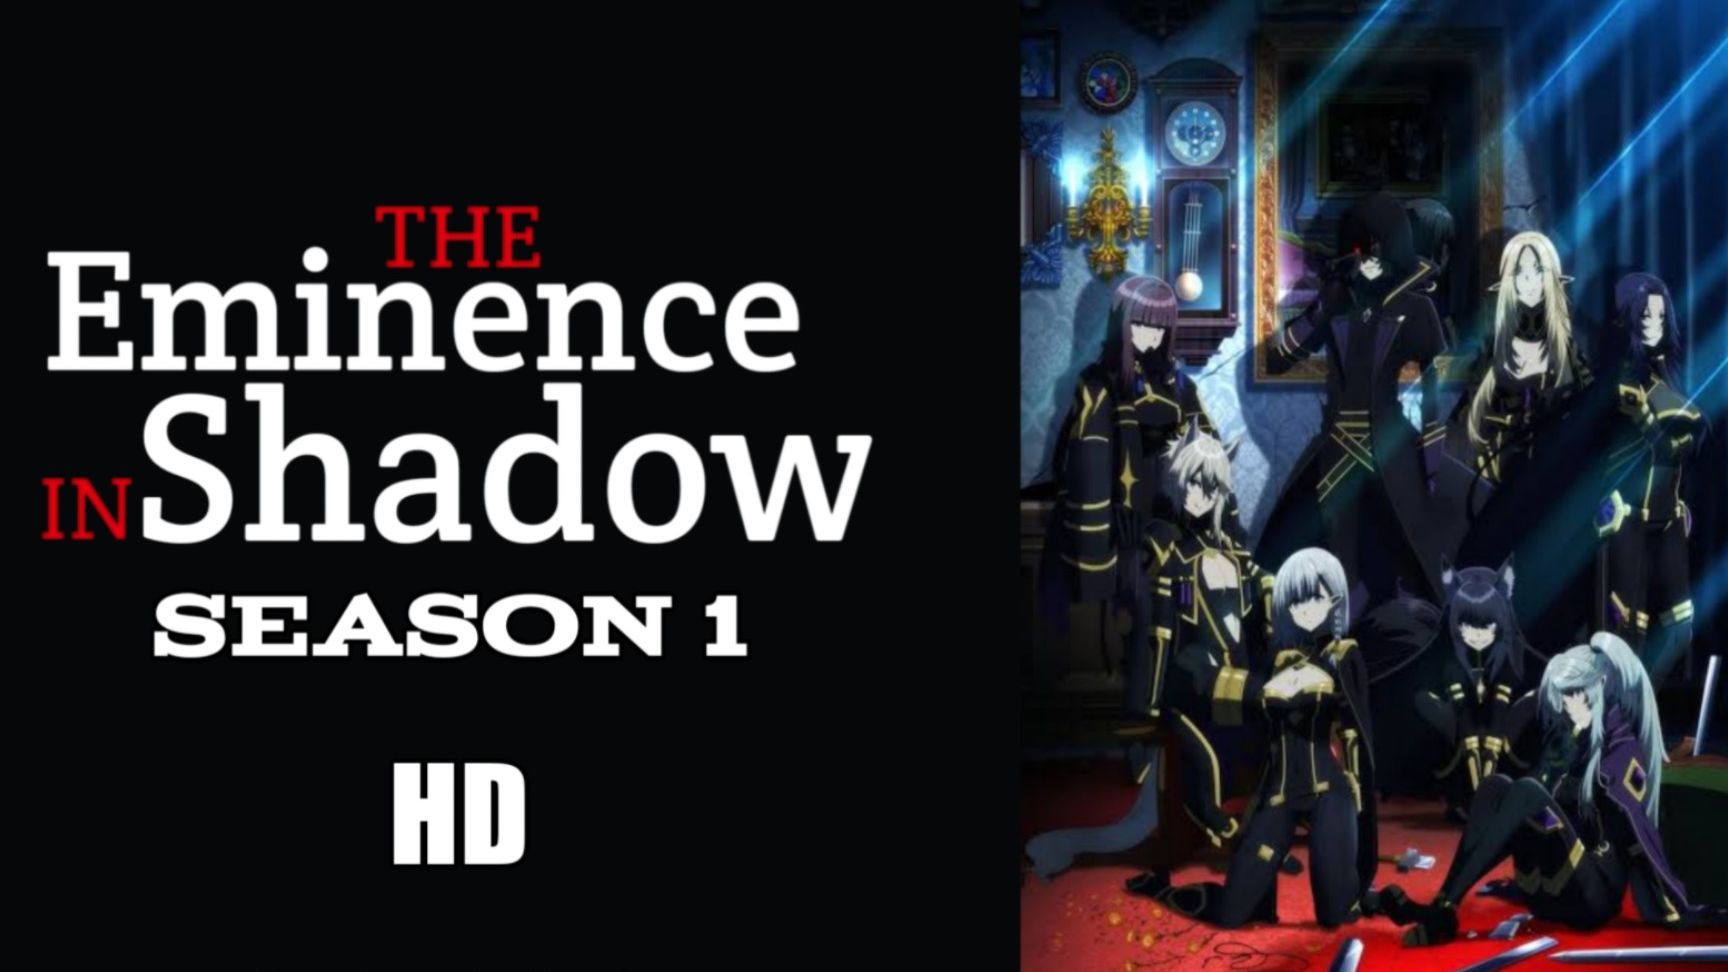 The eminence in shadow master of garden ep 13 Visions..Zeta and